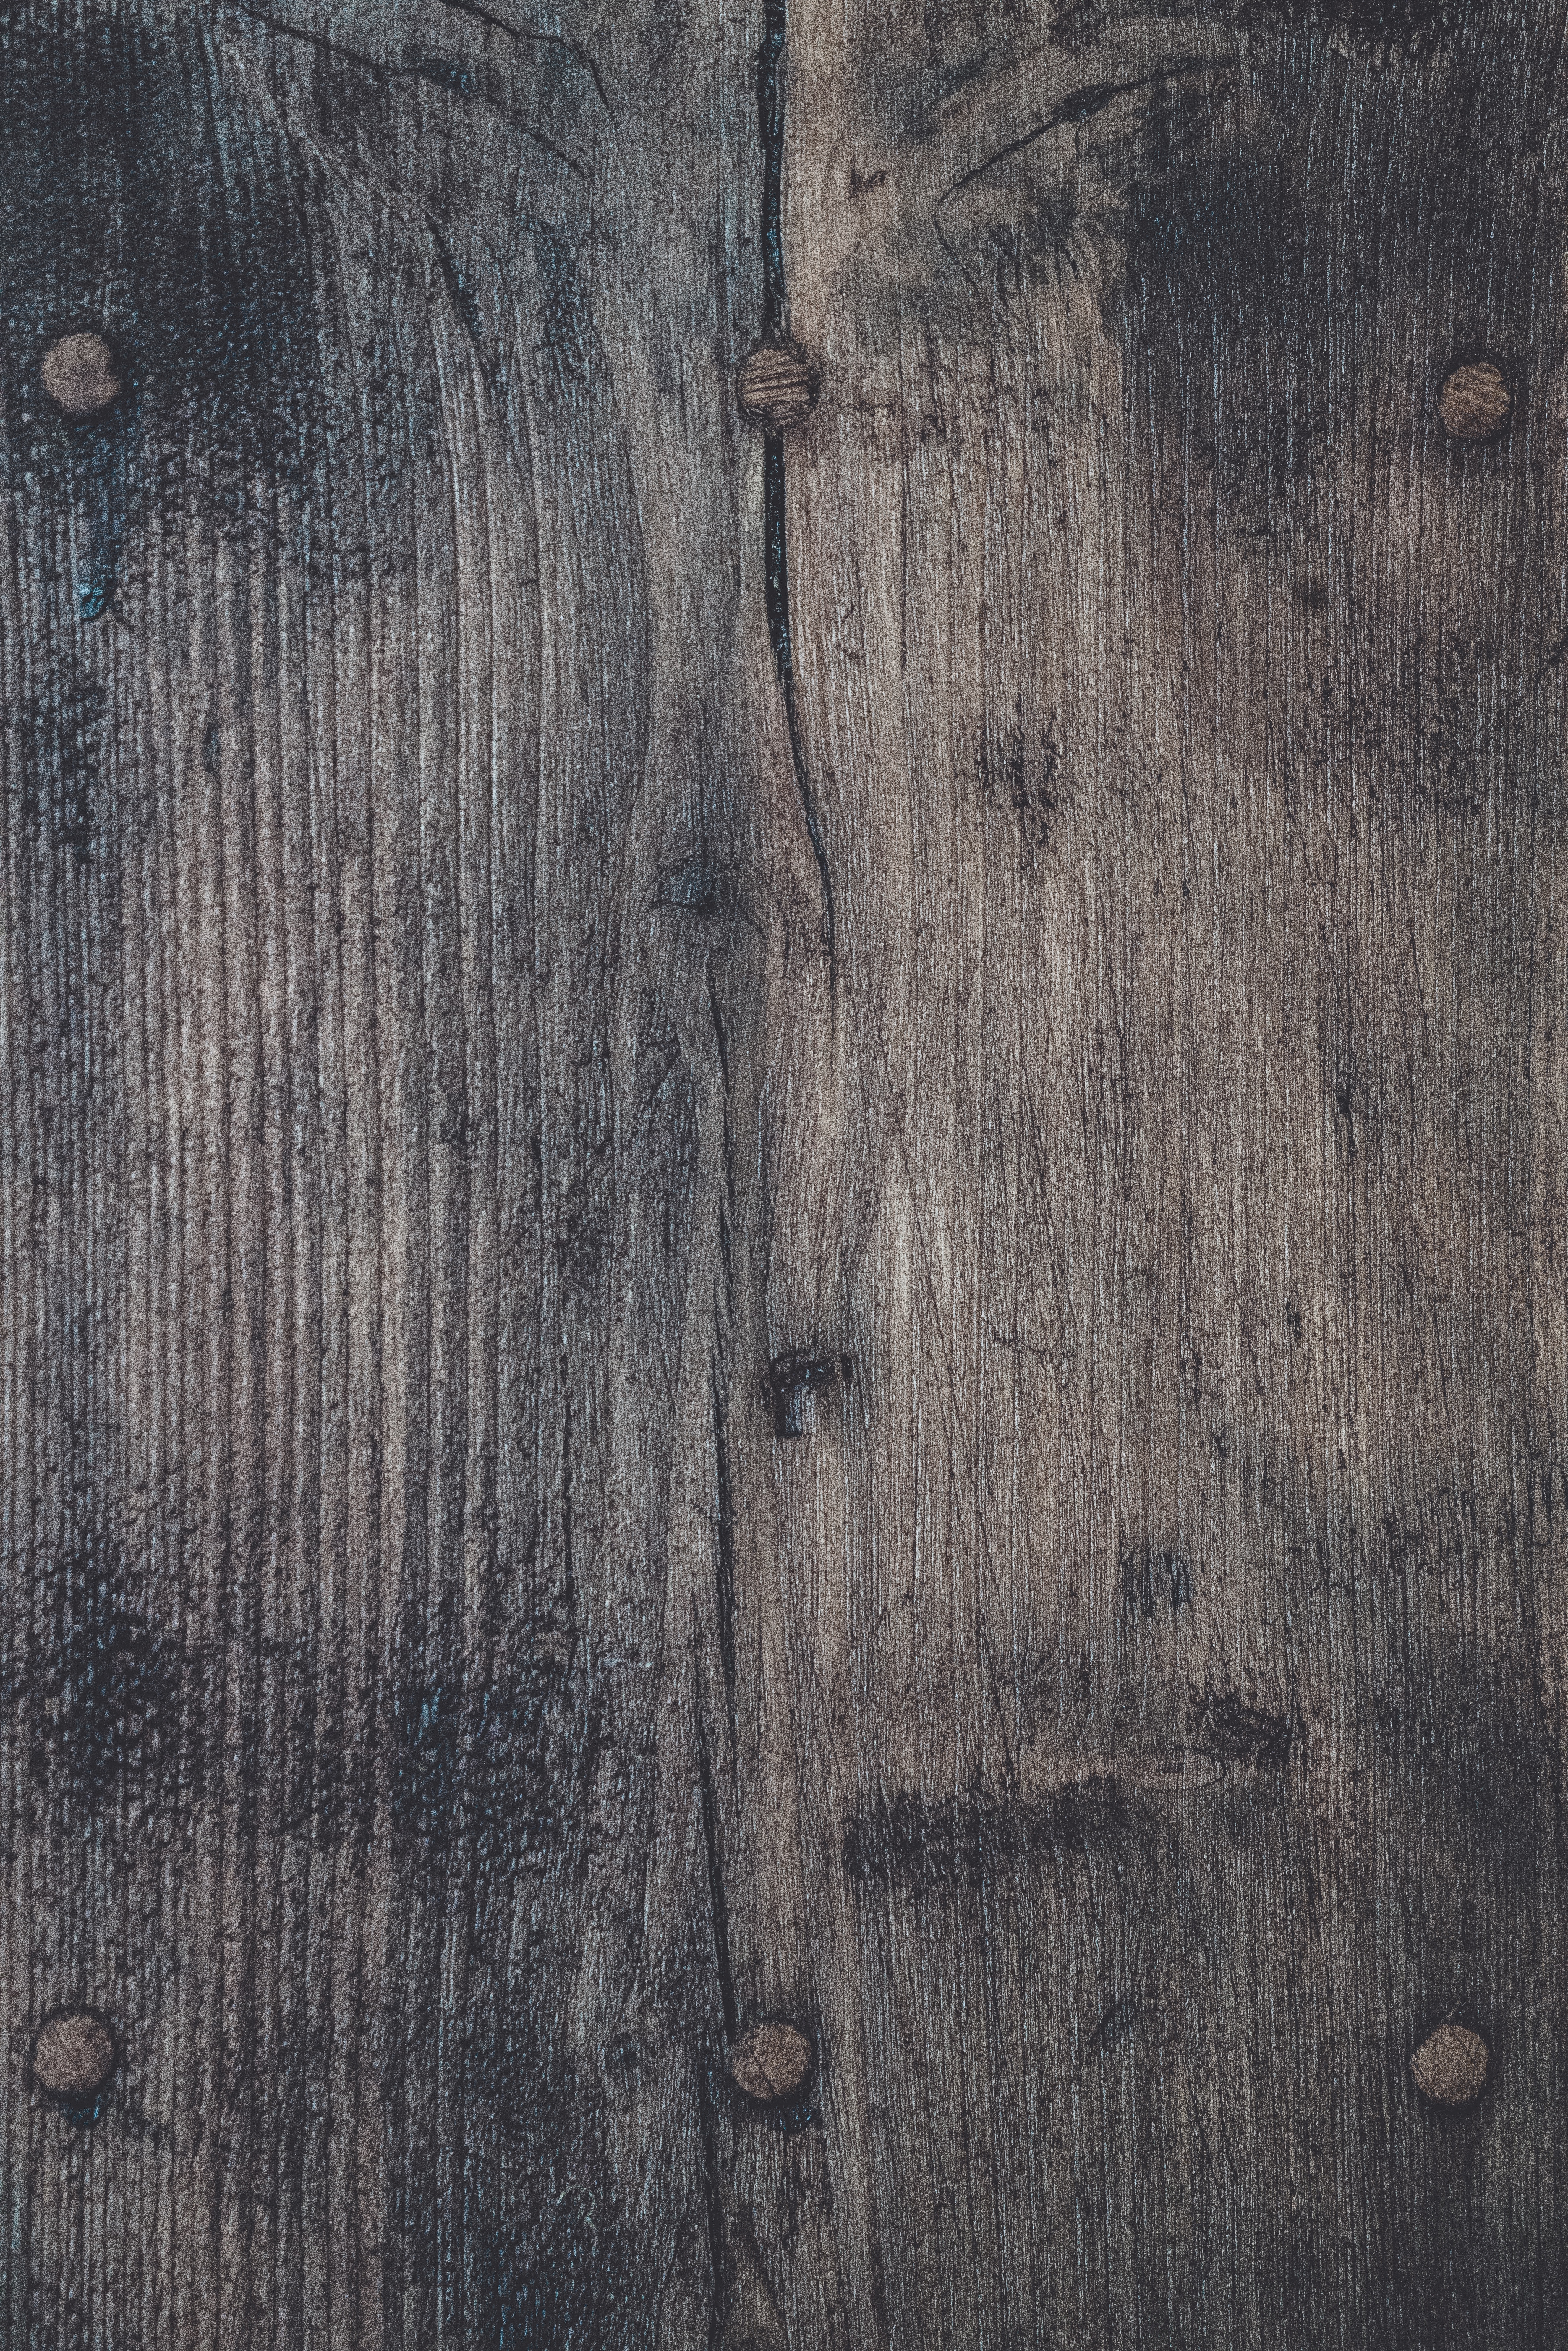 texture, ribbed, textures, surface, wood, wooden QHD